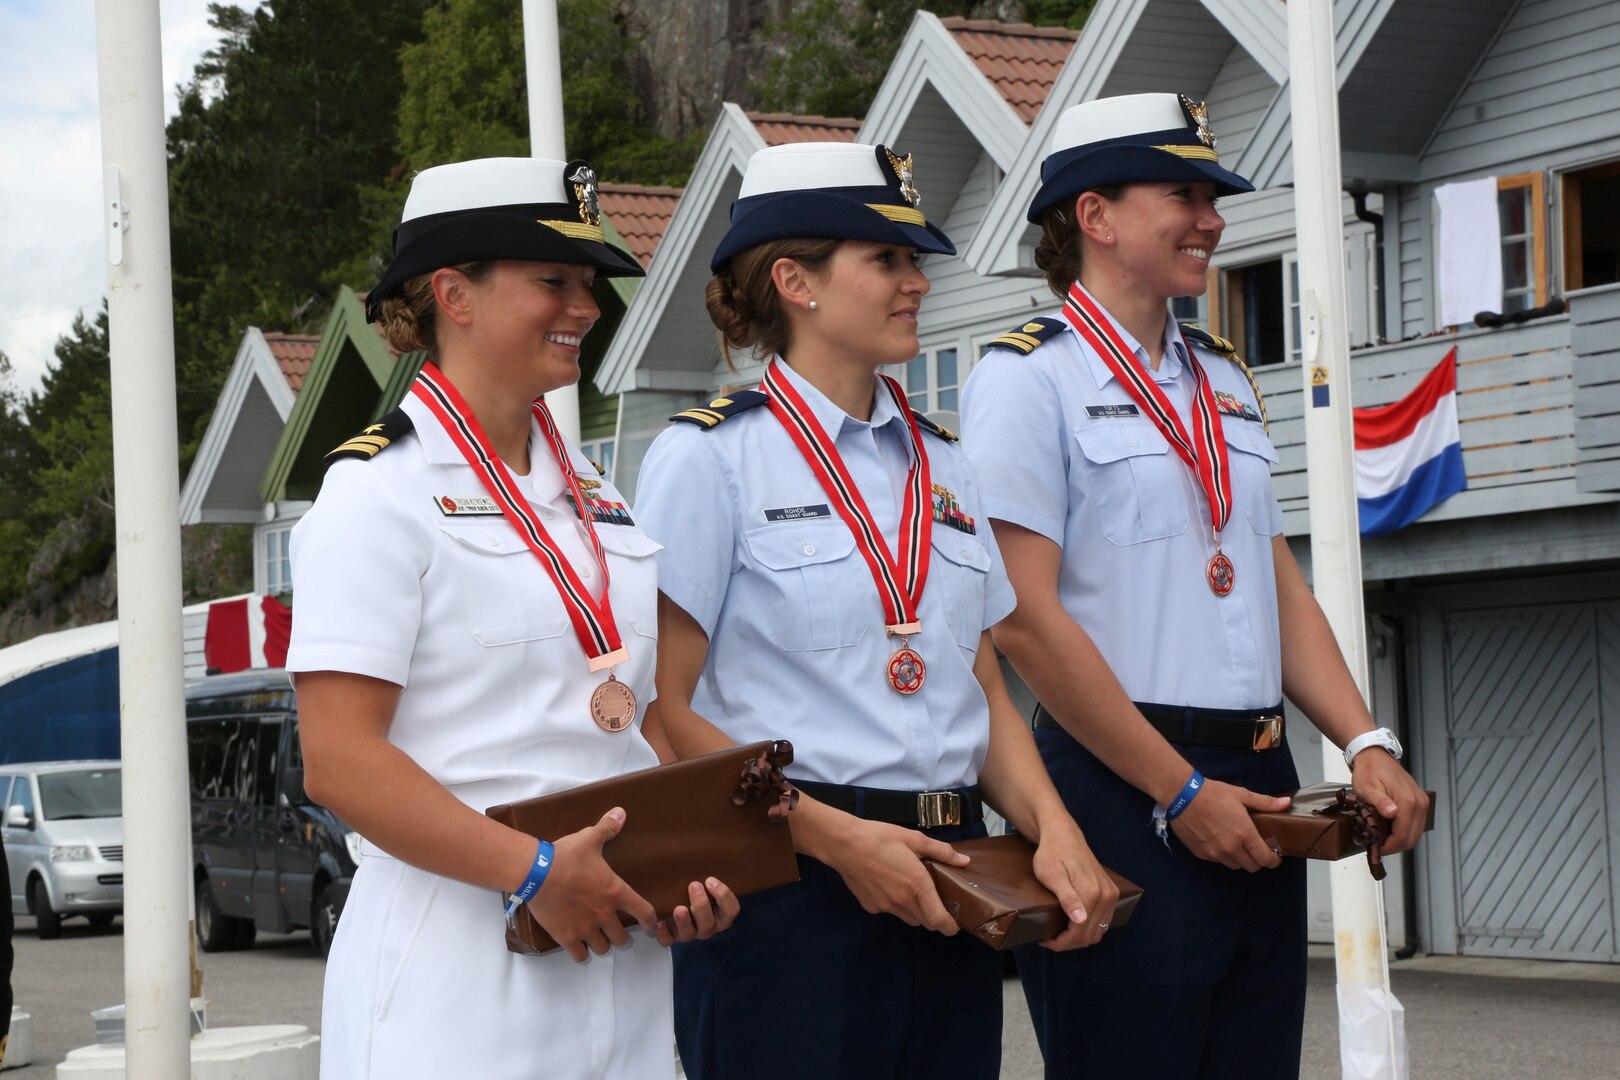 Navy LT Trisha Kutkiewicz, Coast Guard LTJG Krysta Rohde and Coast Guard LT Elizabeth Tufts of the US Armed Forces Womens Sailing Team win the bronze medal of the CISM World Sailing Military Championship in Bergen, Norway 27 June to 4 July 2013.